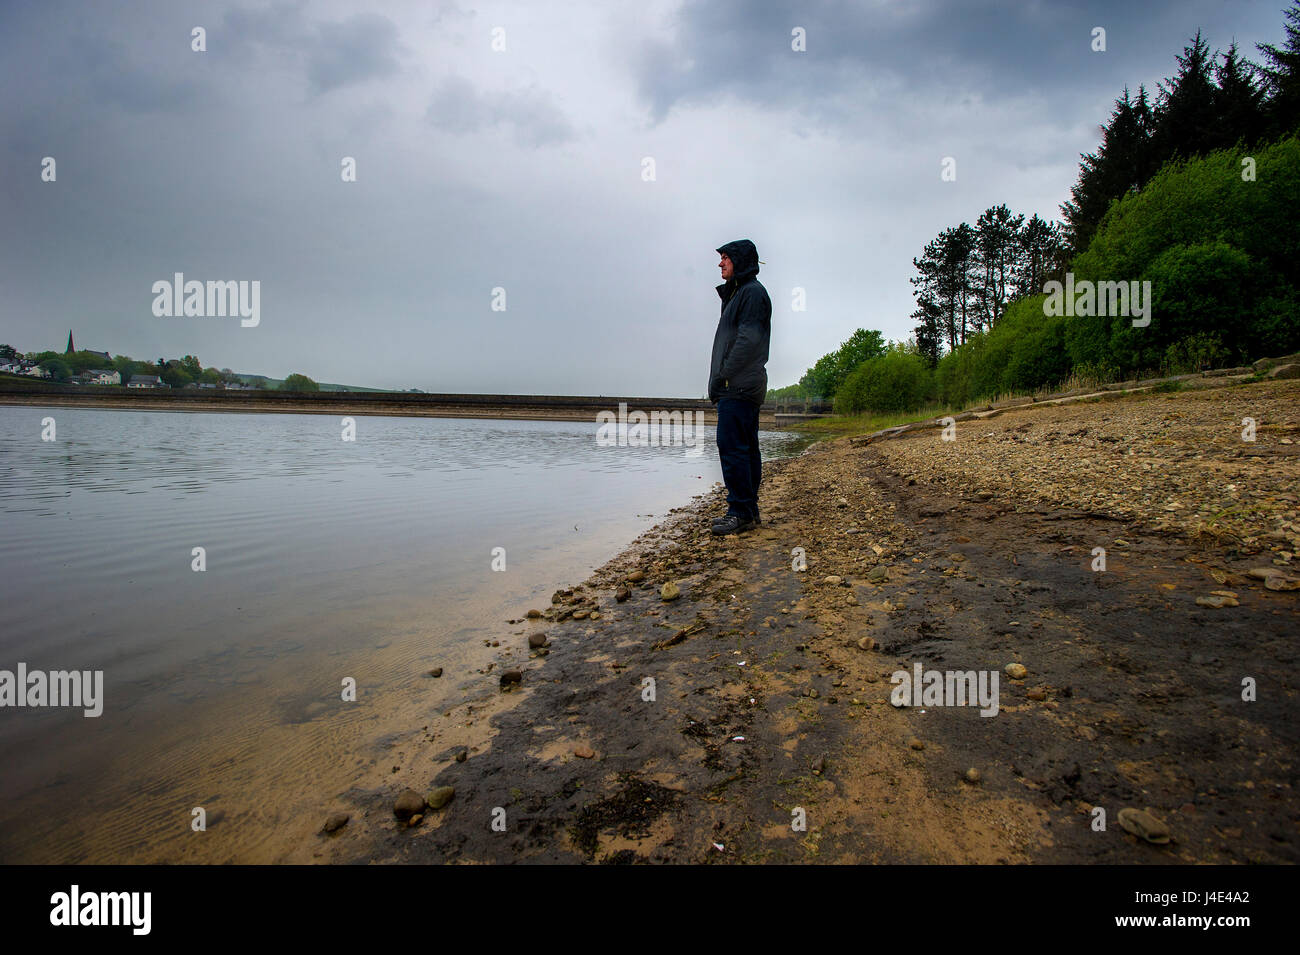 Blackburn, Lancashire, UK. 12th May, 2017. Much needed rain arrives in the North West of England as very low water levels at the United Utilities' Wayoh Reservoir near Bolton, Lancashire, are in need of replenishing. Picture by Paul Heyes, Friday May 12, 2017. Credit: Paul Heyes/Alamy Live News Stock Photo